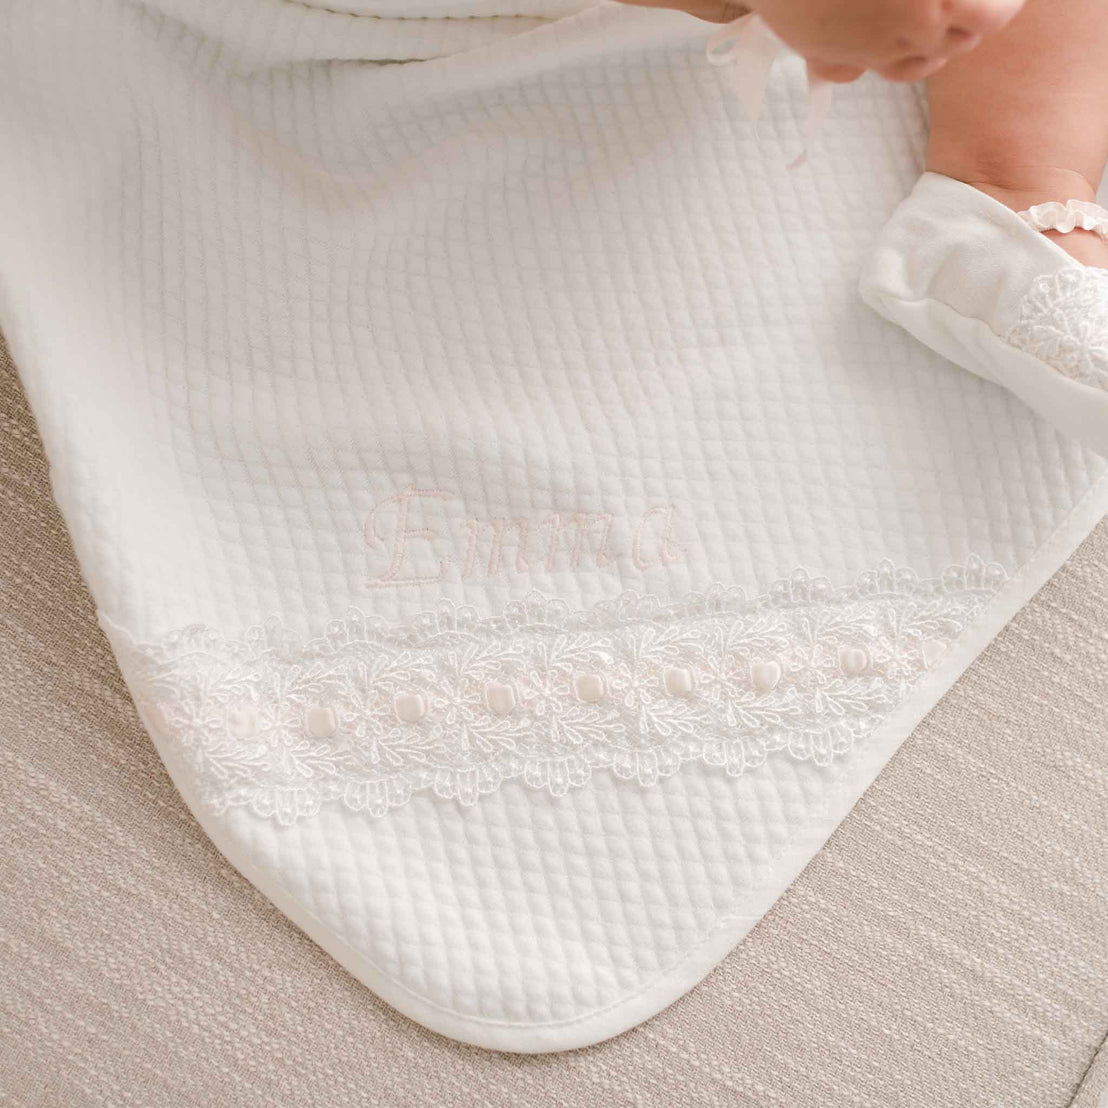 A close-up image of a baby wrapped in an Emma Personalized Blanket, featuring delicate lace detailing along the edge, perfect for a christening.